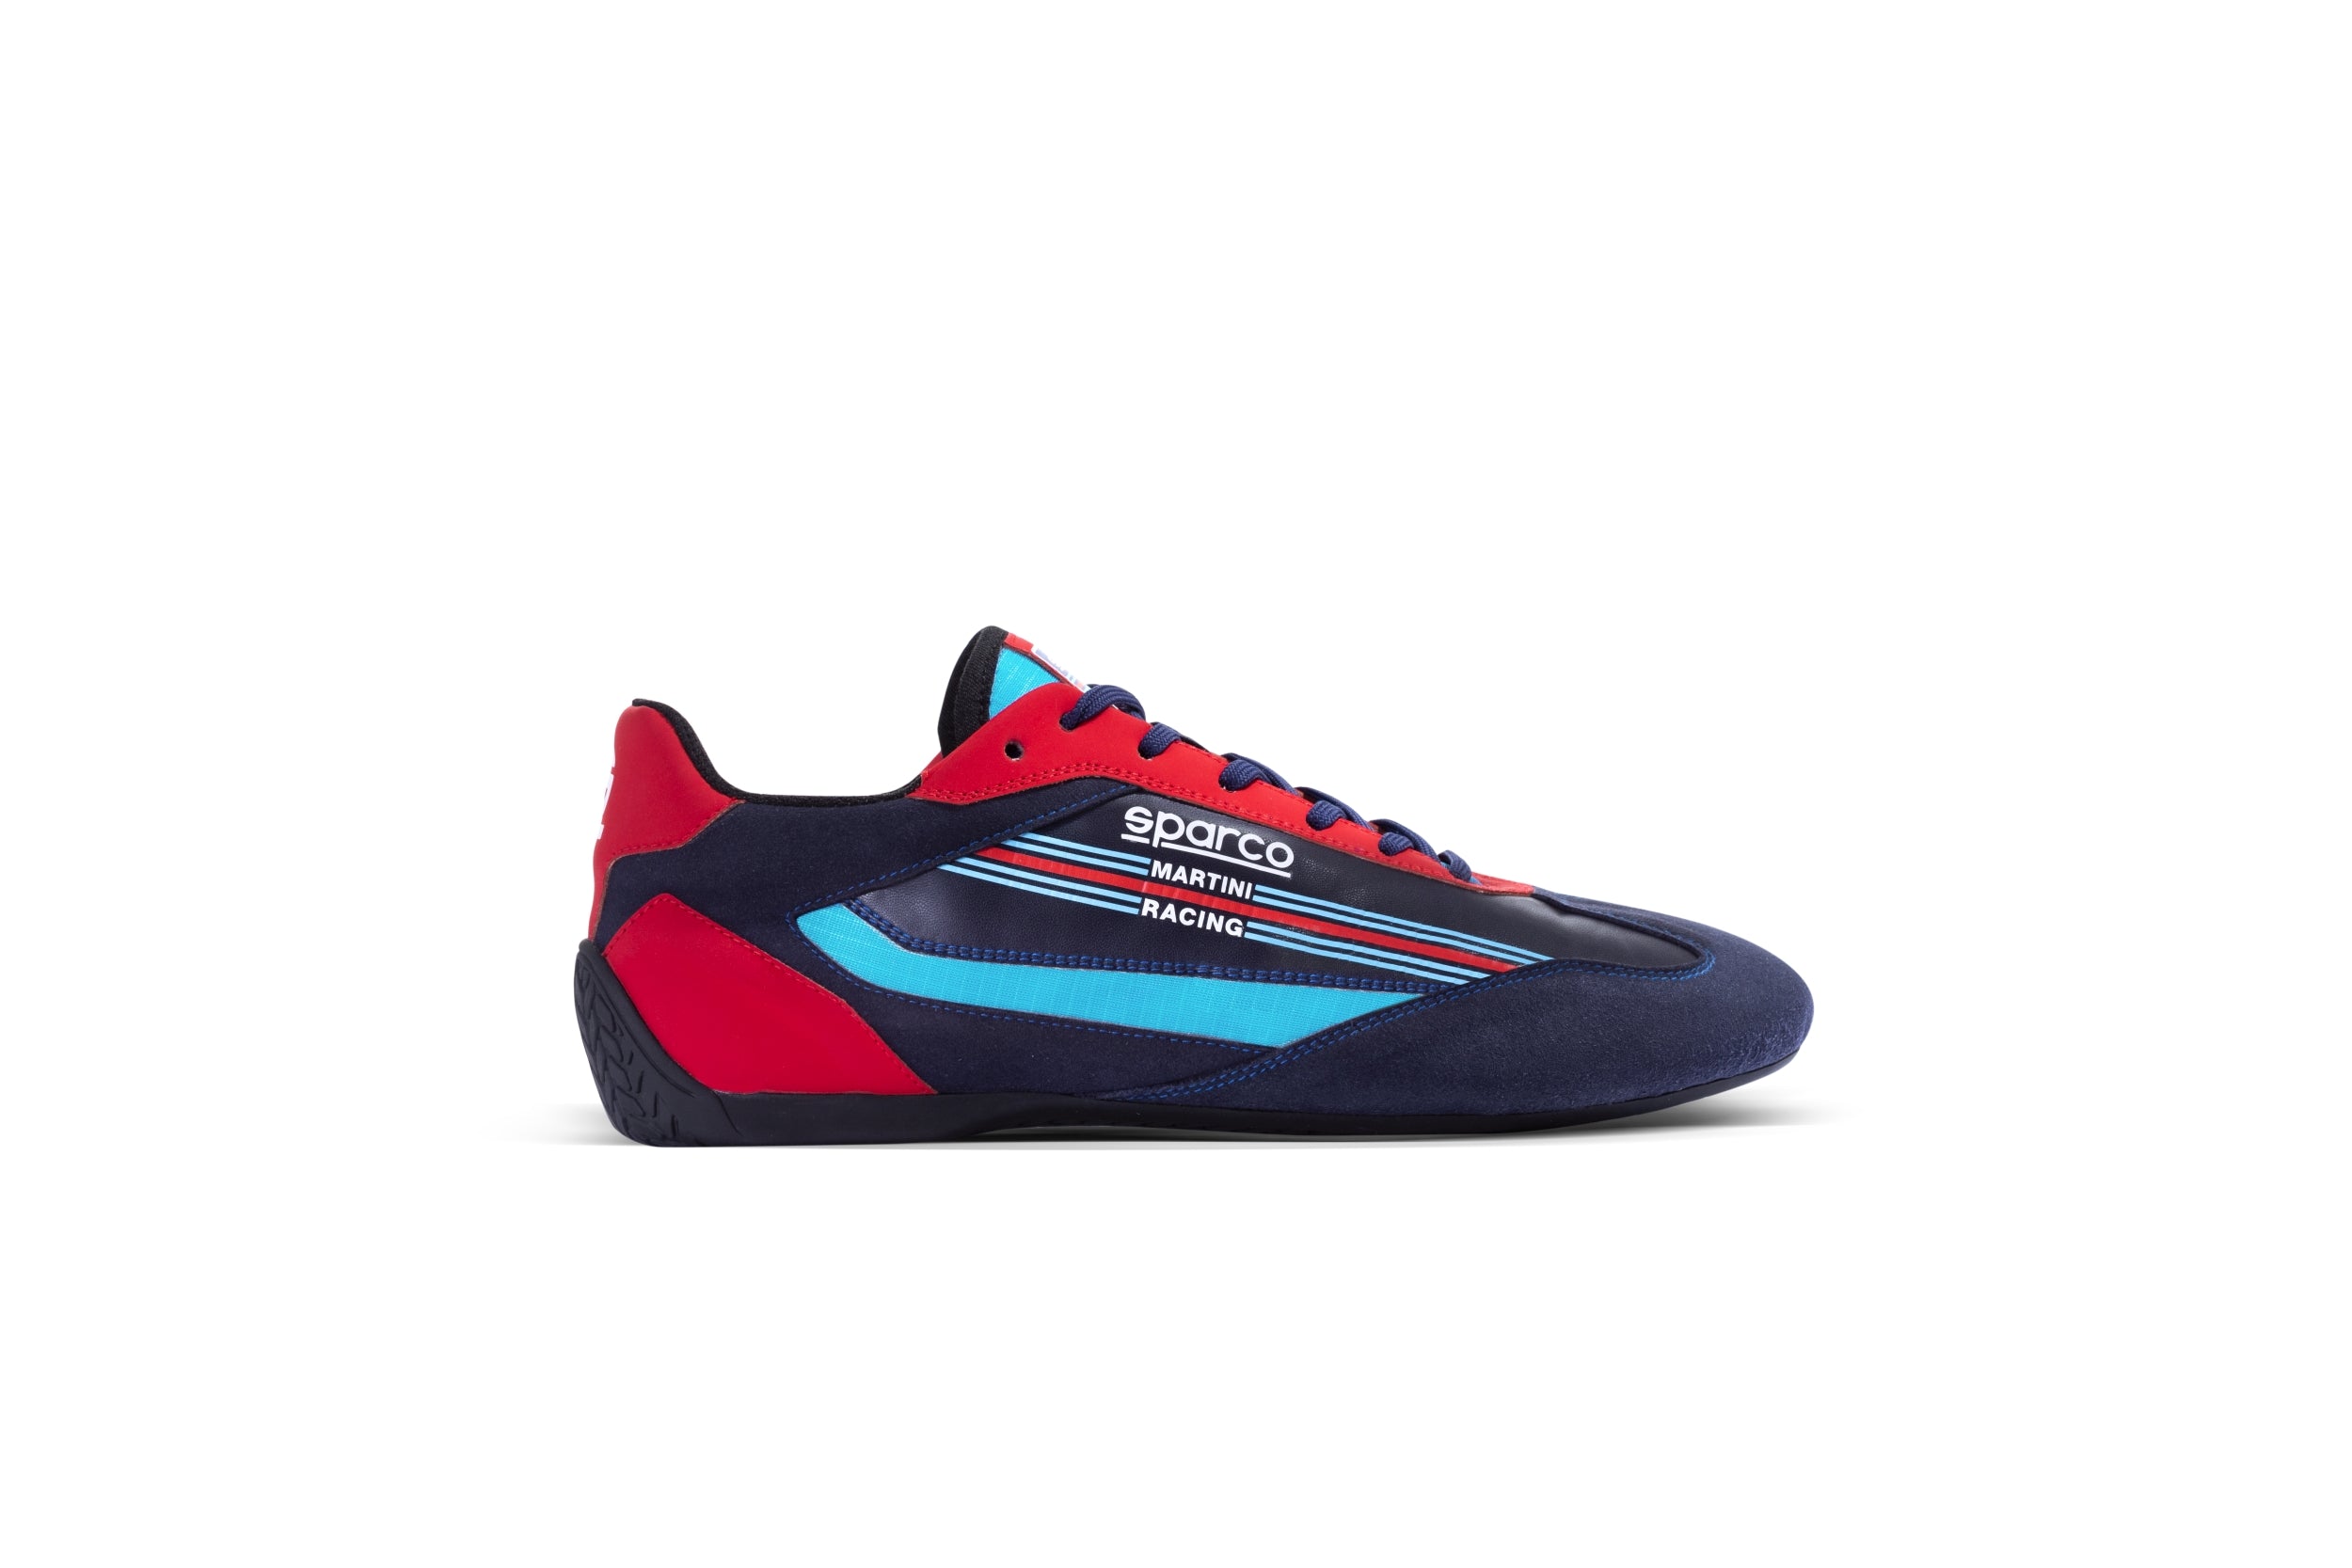 SPARCO 0012A7MR36BM S-DRIVE MARTINI RACING Sneakers shoes, navy blue, size 36 Photo-2 